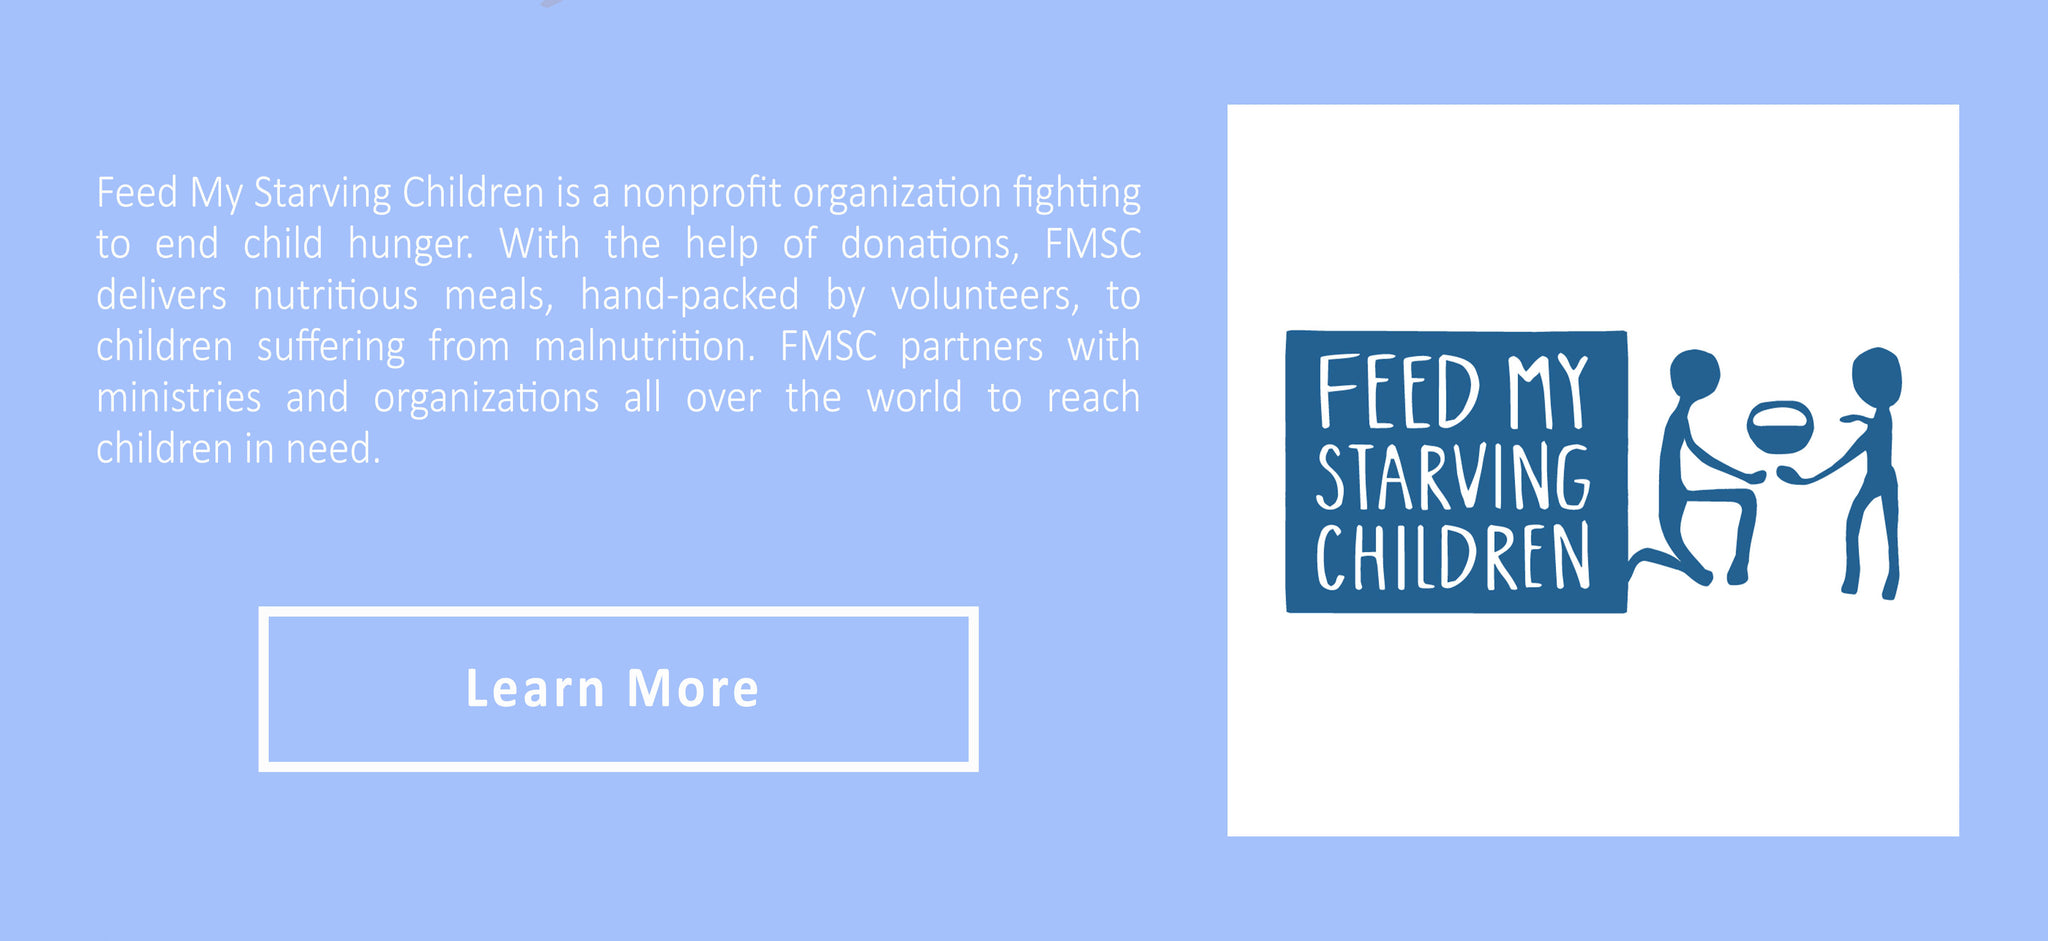 feed my starving children logo and description